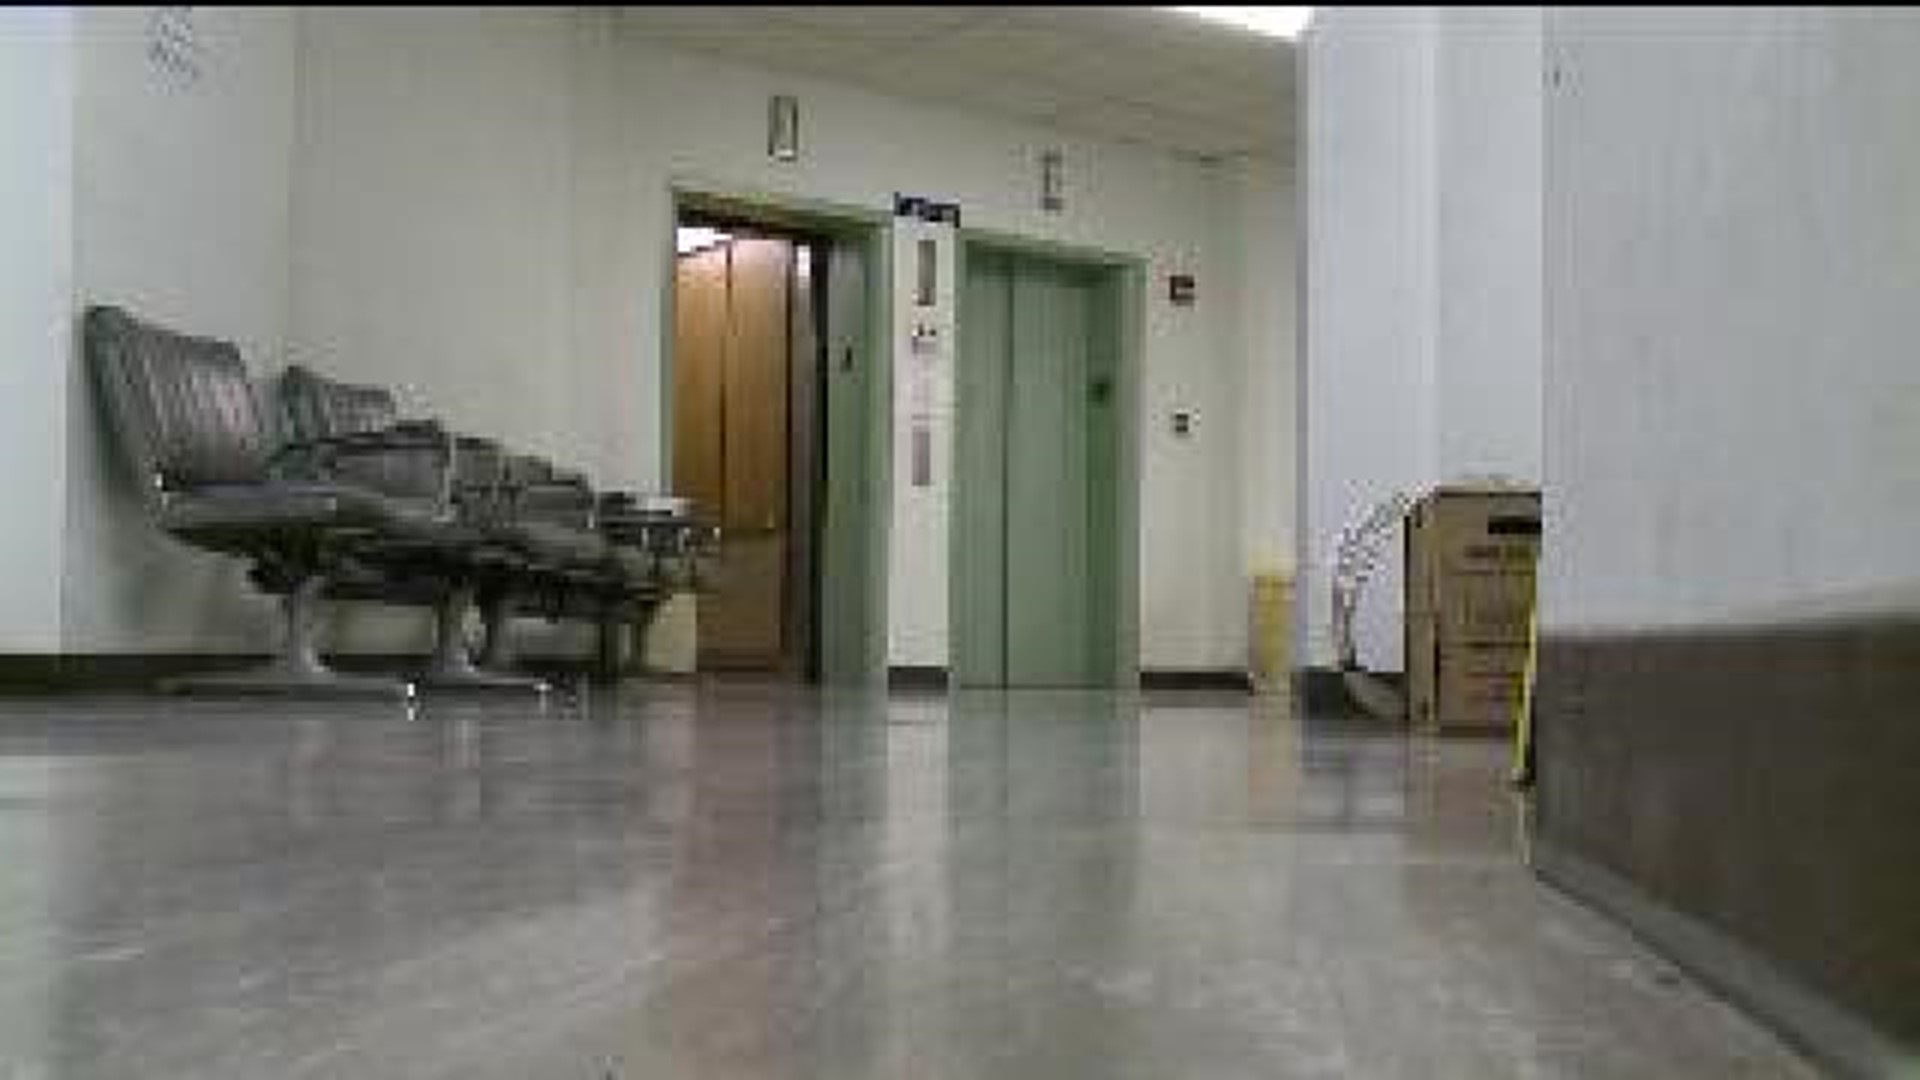 Aging Elevators Cause Problems Inside Luzerne County Courthouse